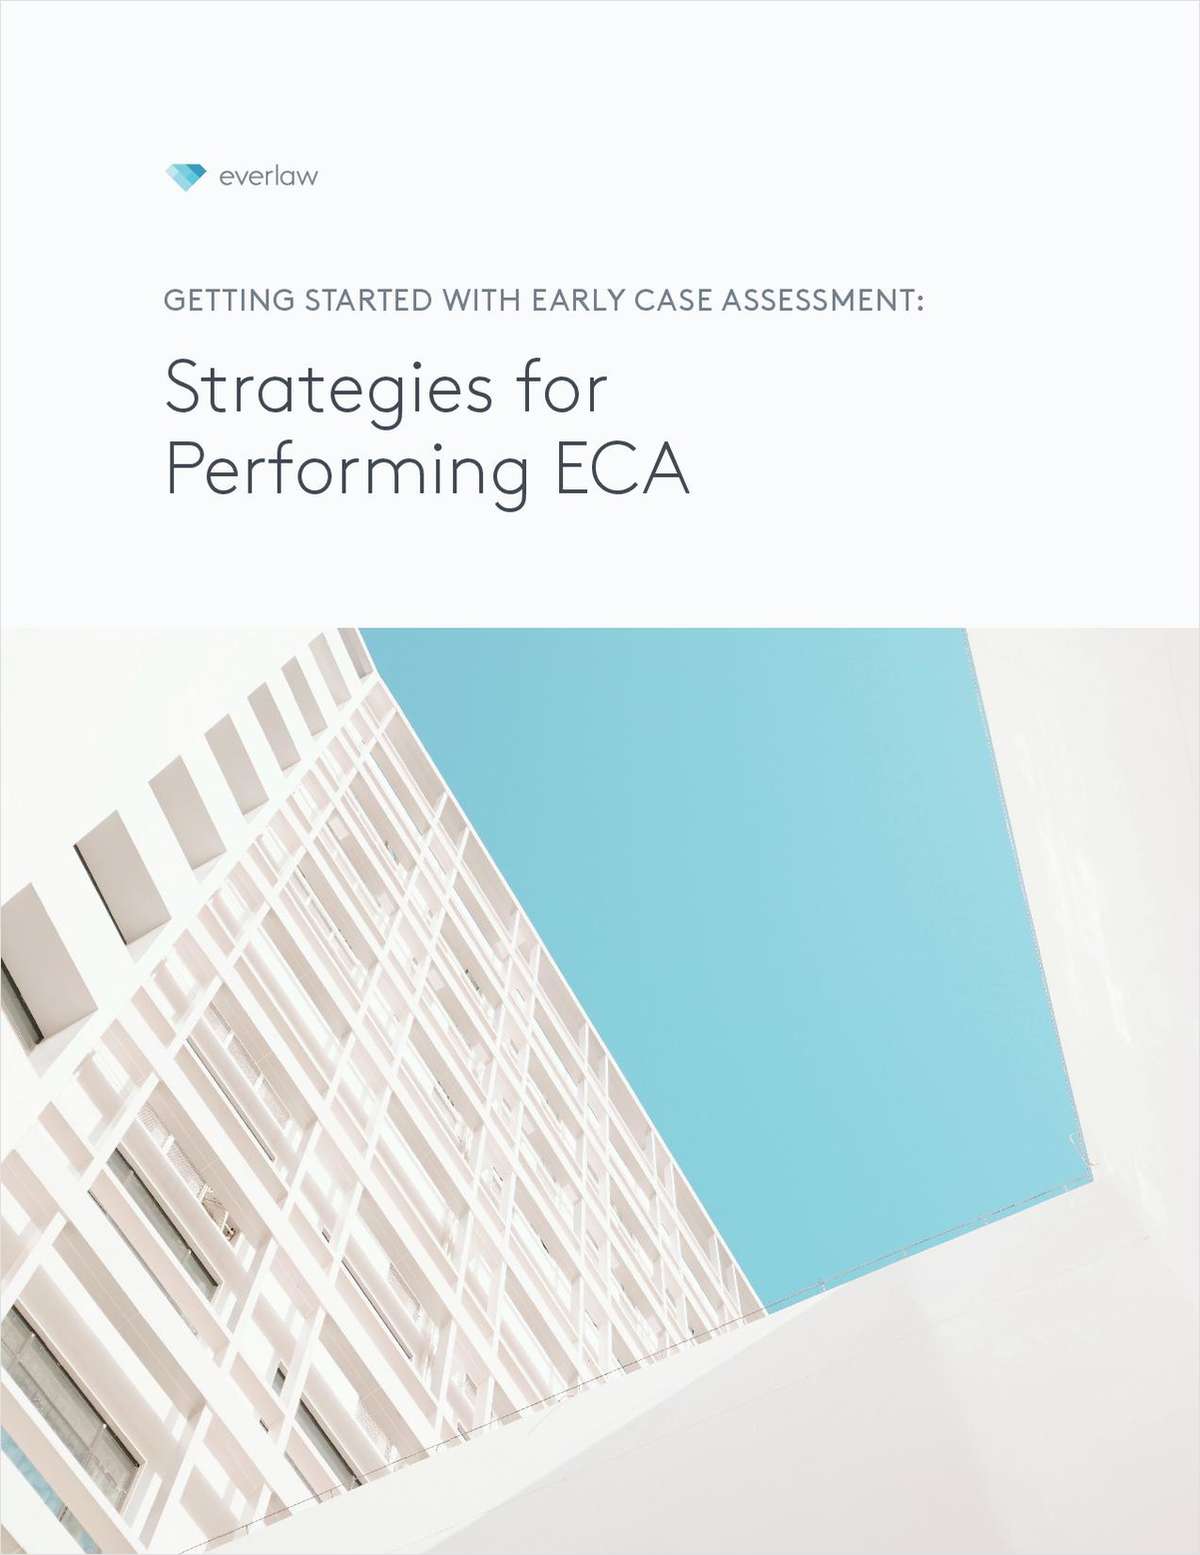 Getting Started with Early Case Assessment: Strategies for Performing ECA